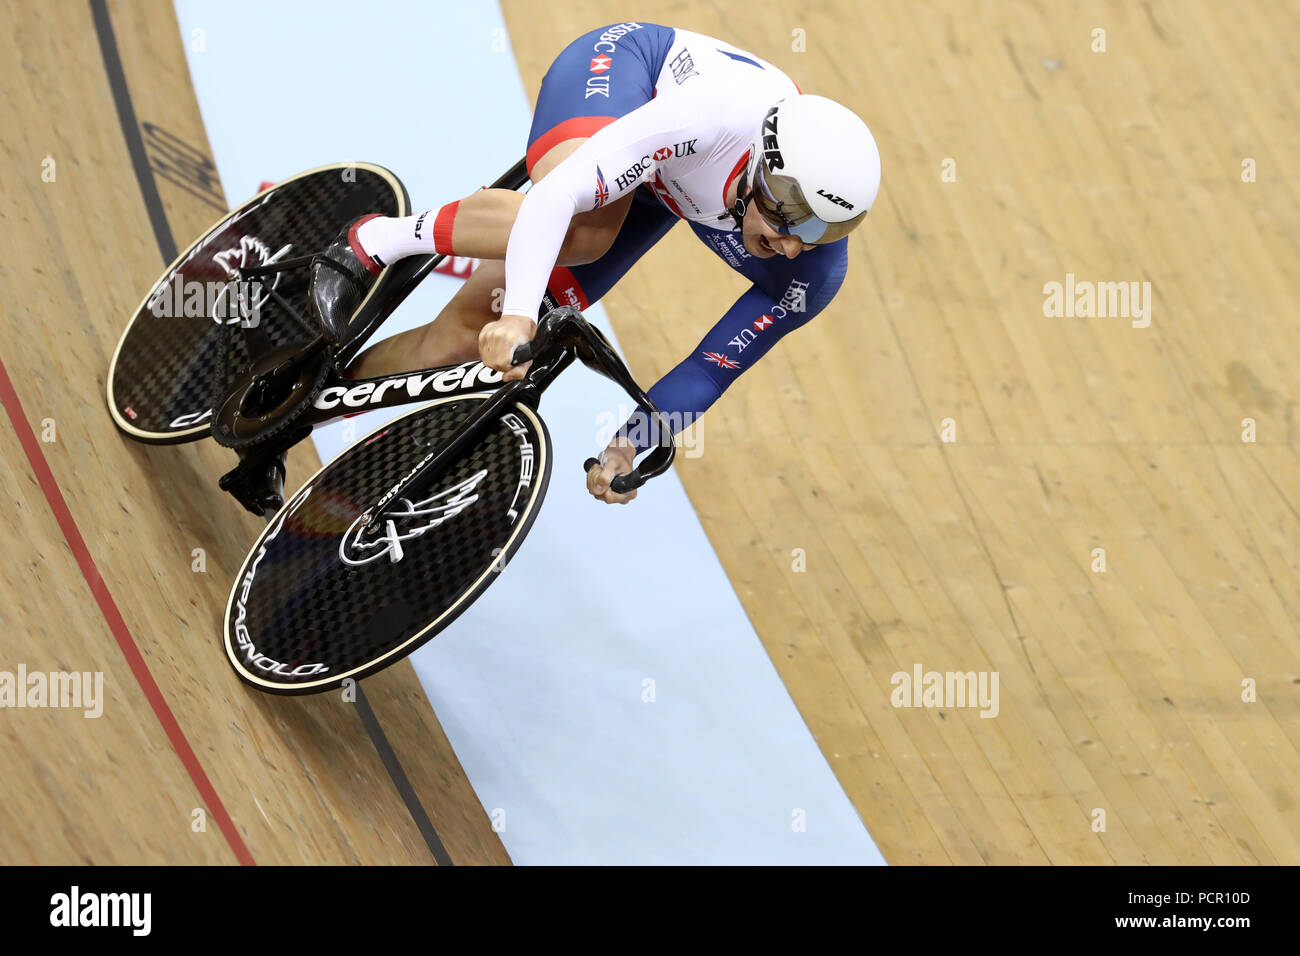 Great Britain's Jason Kenny in the Team Sprint Men's race during day two of the 2018 European Championships at the Sir Chris Hoy Velodrome, Glasgow. PRESS ASSOCIATION Photo. Picture date: Friday August 3, 2018. See PA story Cycling European. Photo credit should read: John Walton/PA Wire. RESTRICTIONS: Editorial use only, no commercial use without prior permissionduring day two of the 2018 European Championships at the Sir Chris Hoy Velodrome, Glasgow. PRESS ASSOCIATION Photo. Picture date: Friday August 3, 2018. See PA story Cycling European. Photo credit should read: John Walton/PA Wire. REST Stock Photo